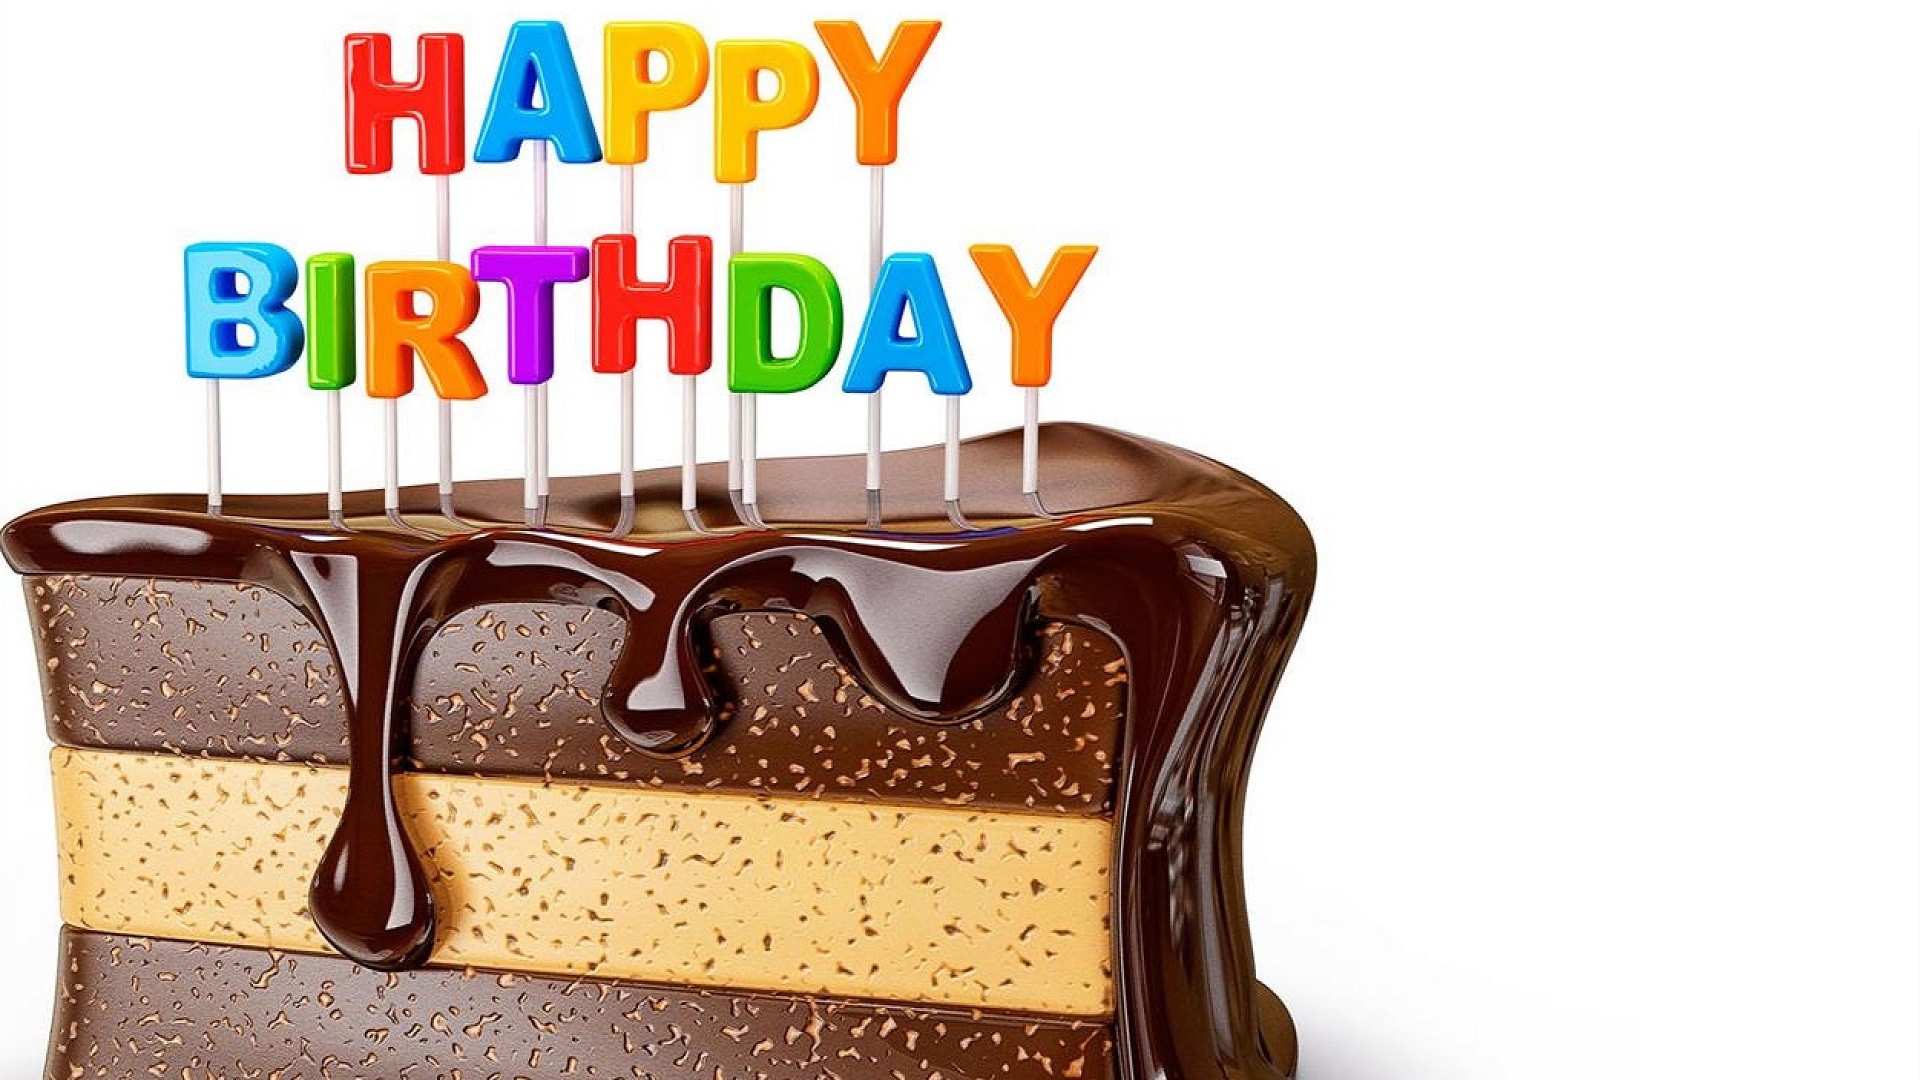 1920x1080 happy birthday chocolaty cake for you cool images free tablet background  wallpapers smart phones mac desktop images 1080p digital photos 1920Ã1080  Wallpaper ...